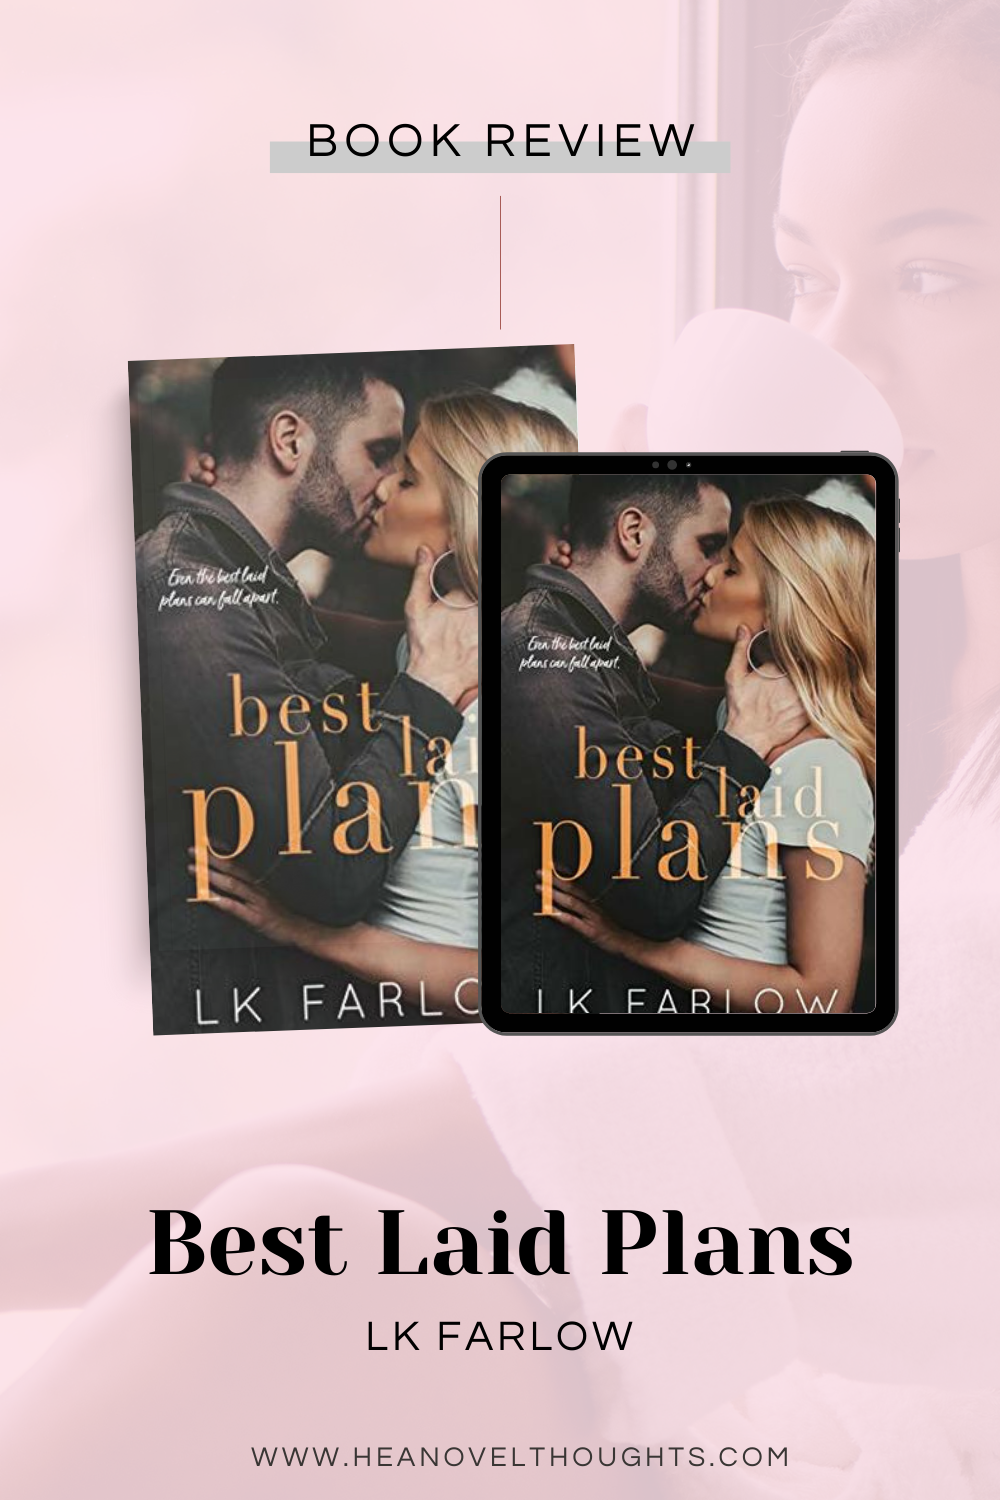 Best Laid Plans by LK Farlow